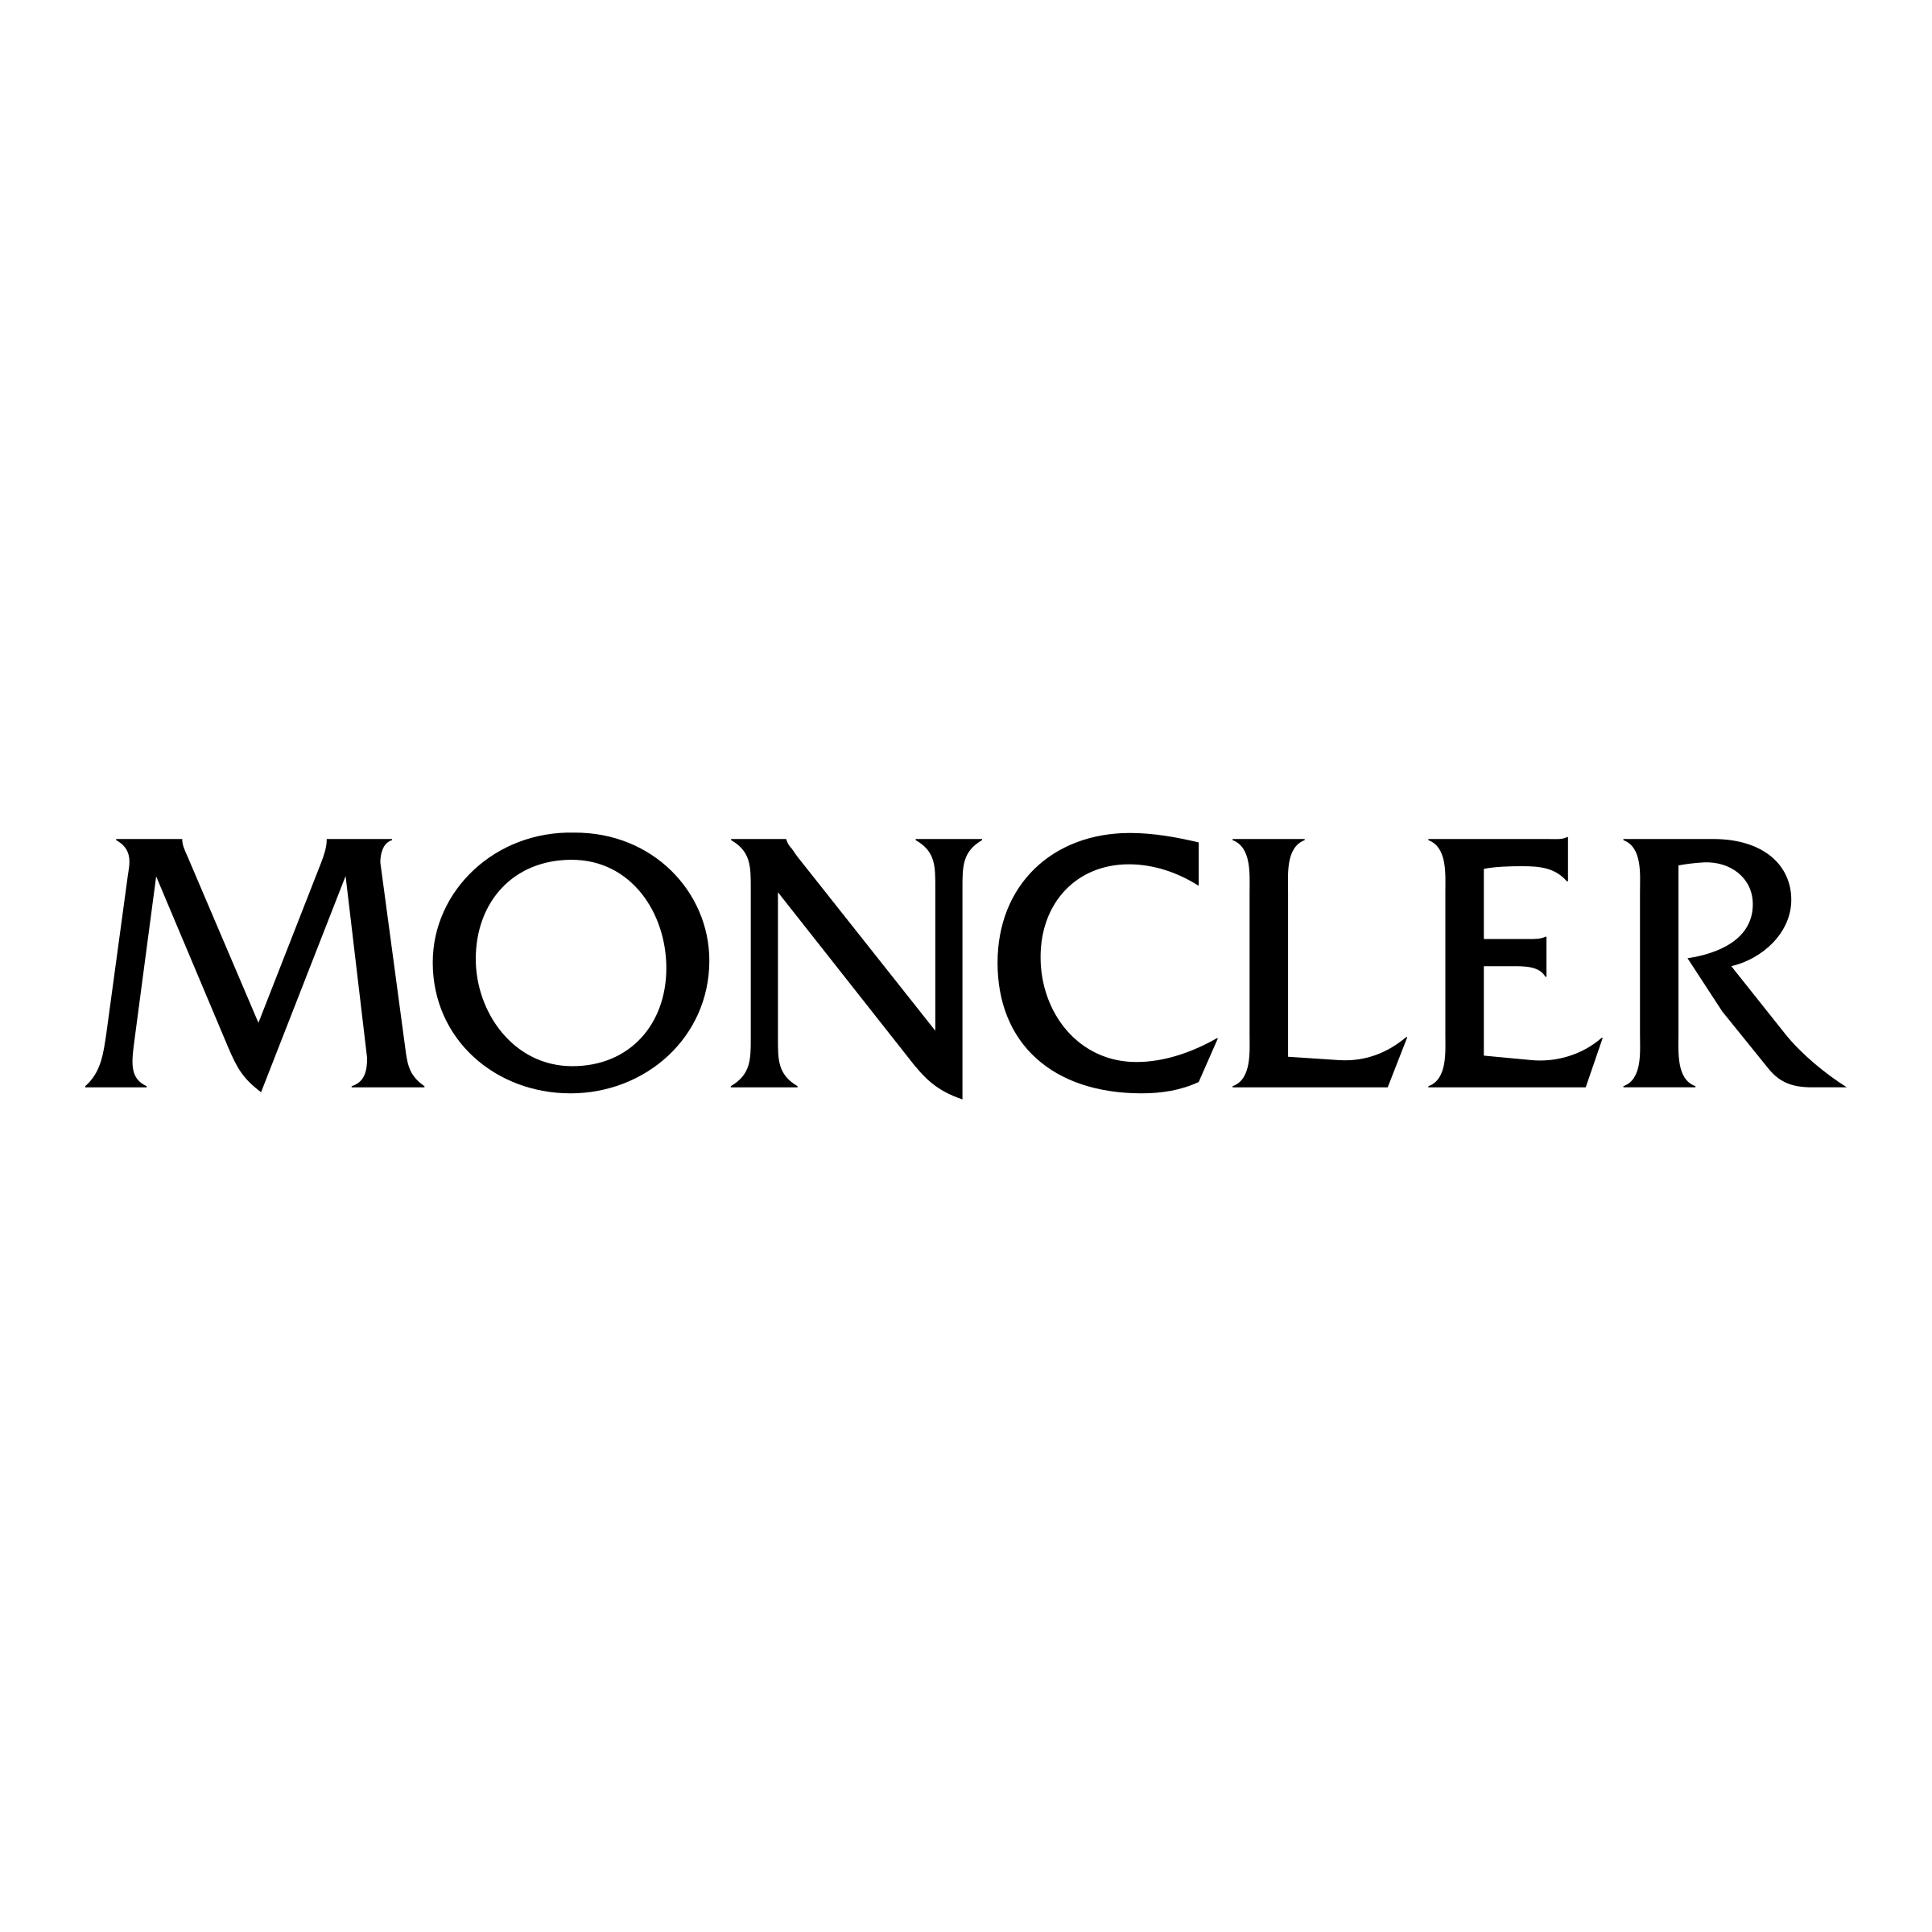 Moncler Wallpapers - Top Free Moncler Backgrounds - WallpaperAccess